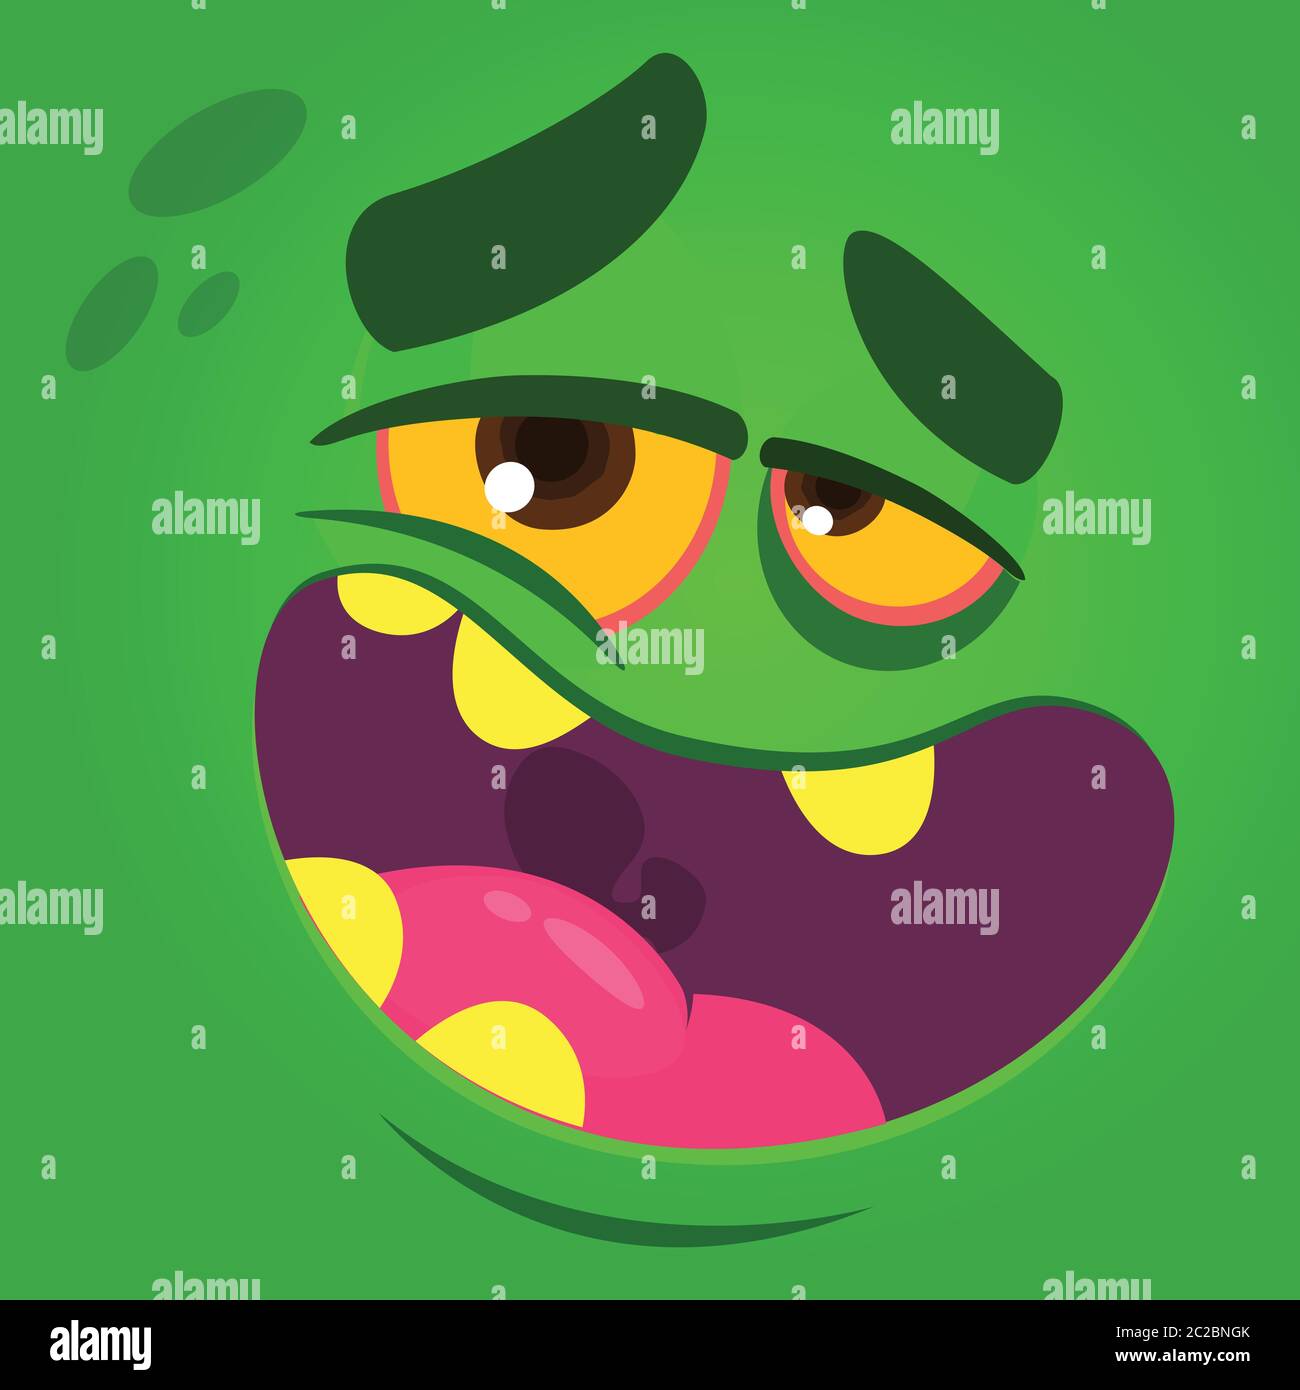 Troll Face Zombie mouth - Mask Design - Sticker